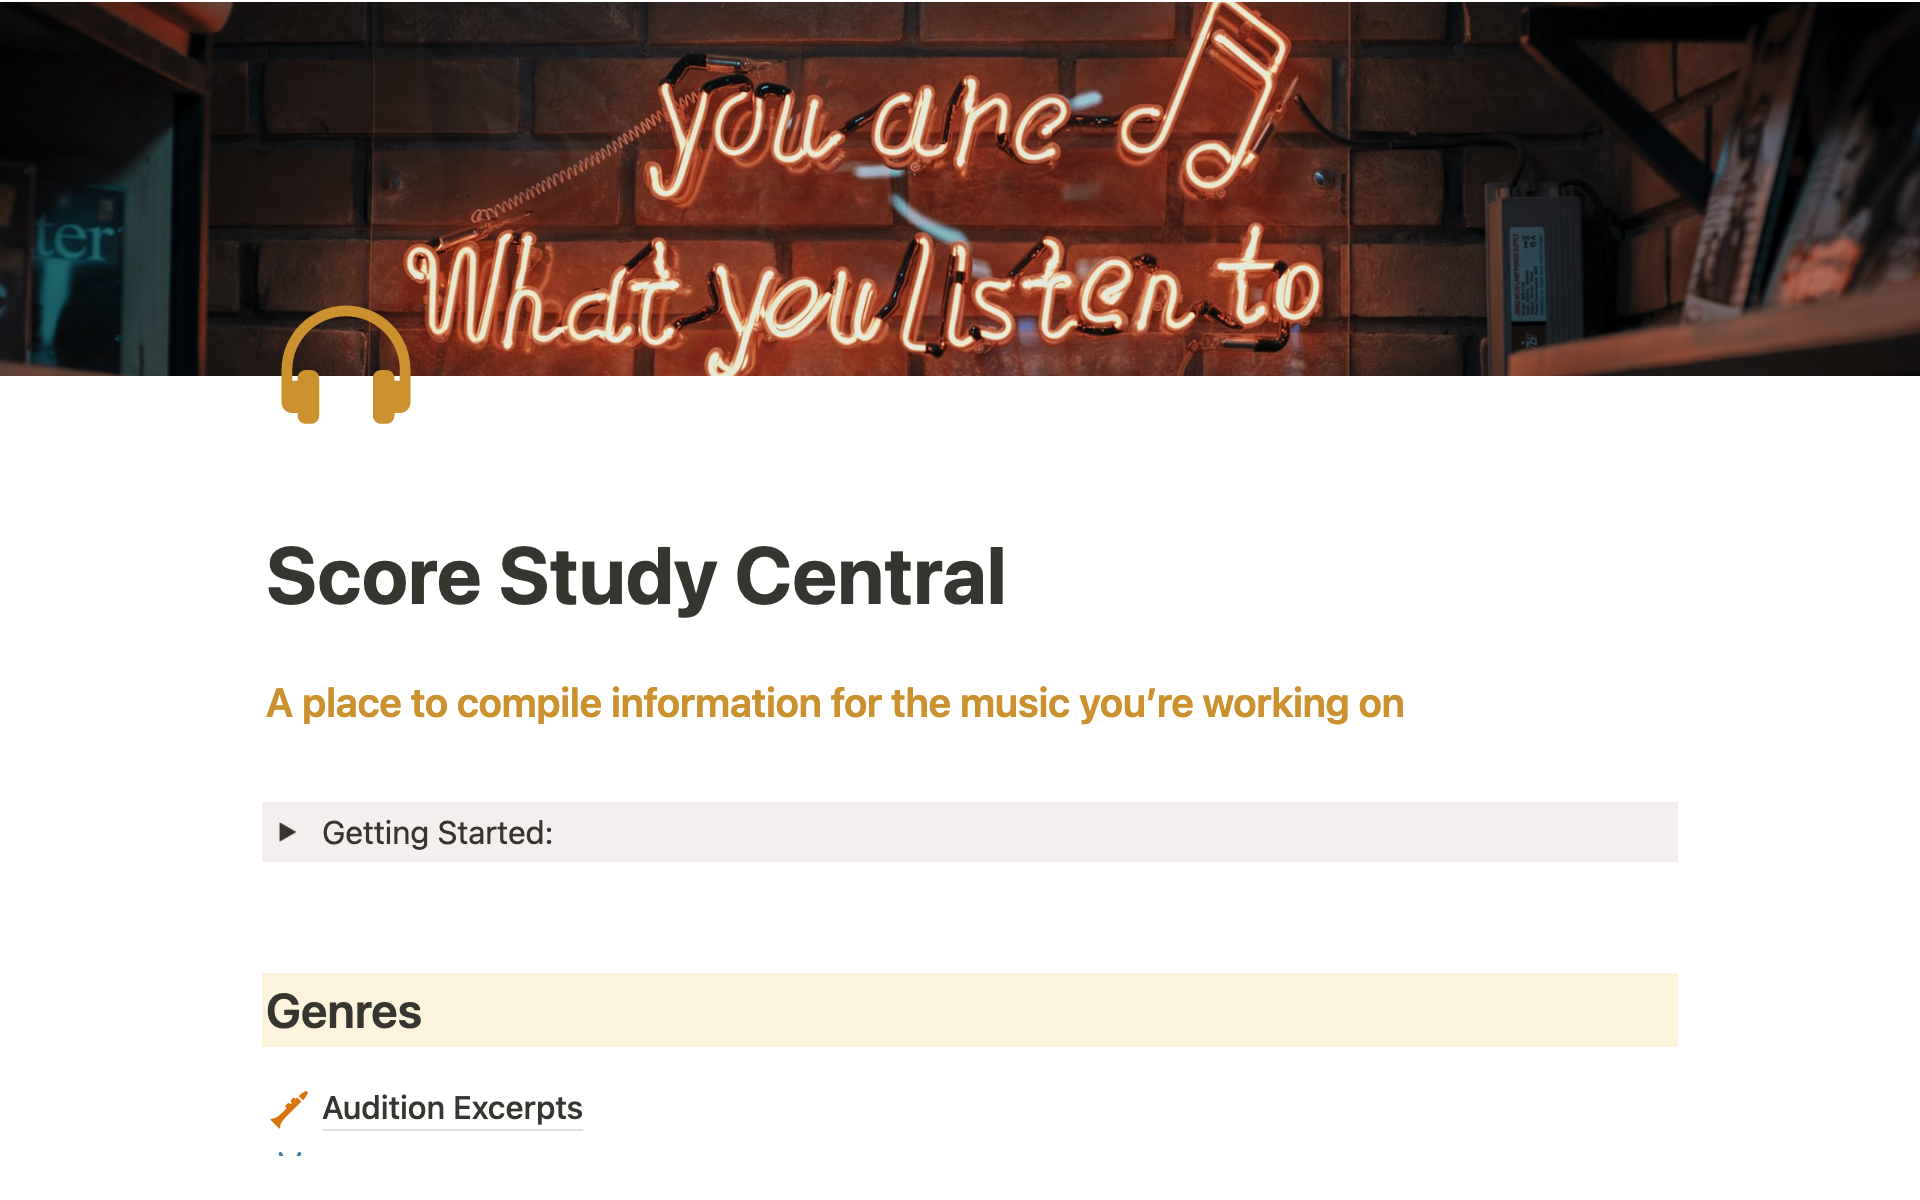 Allows musicians to compile reference recordings, scores, and other information in one place.